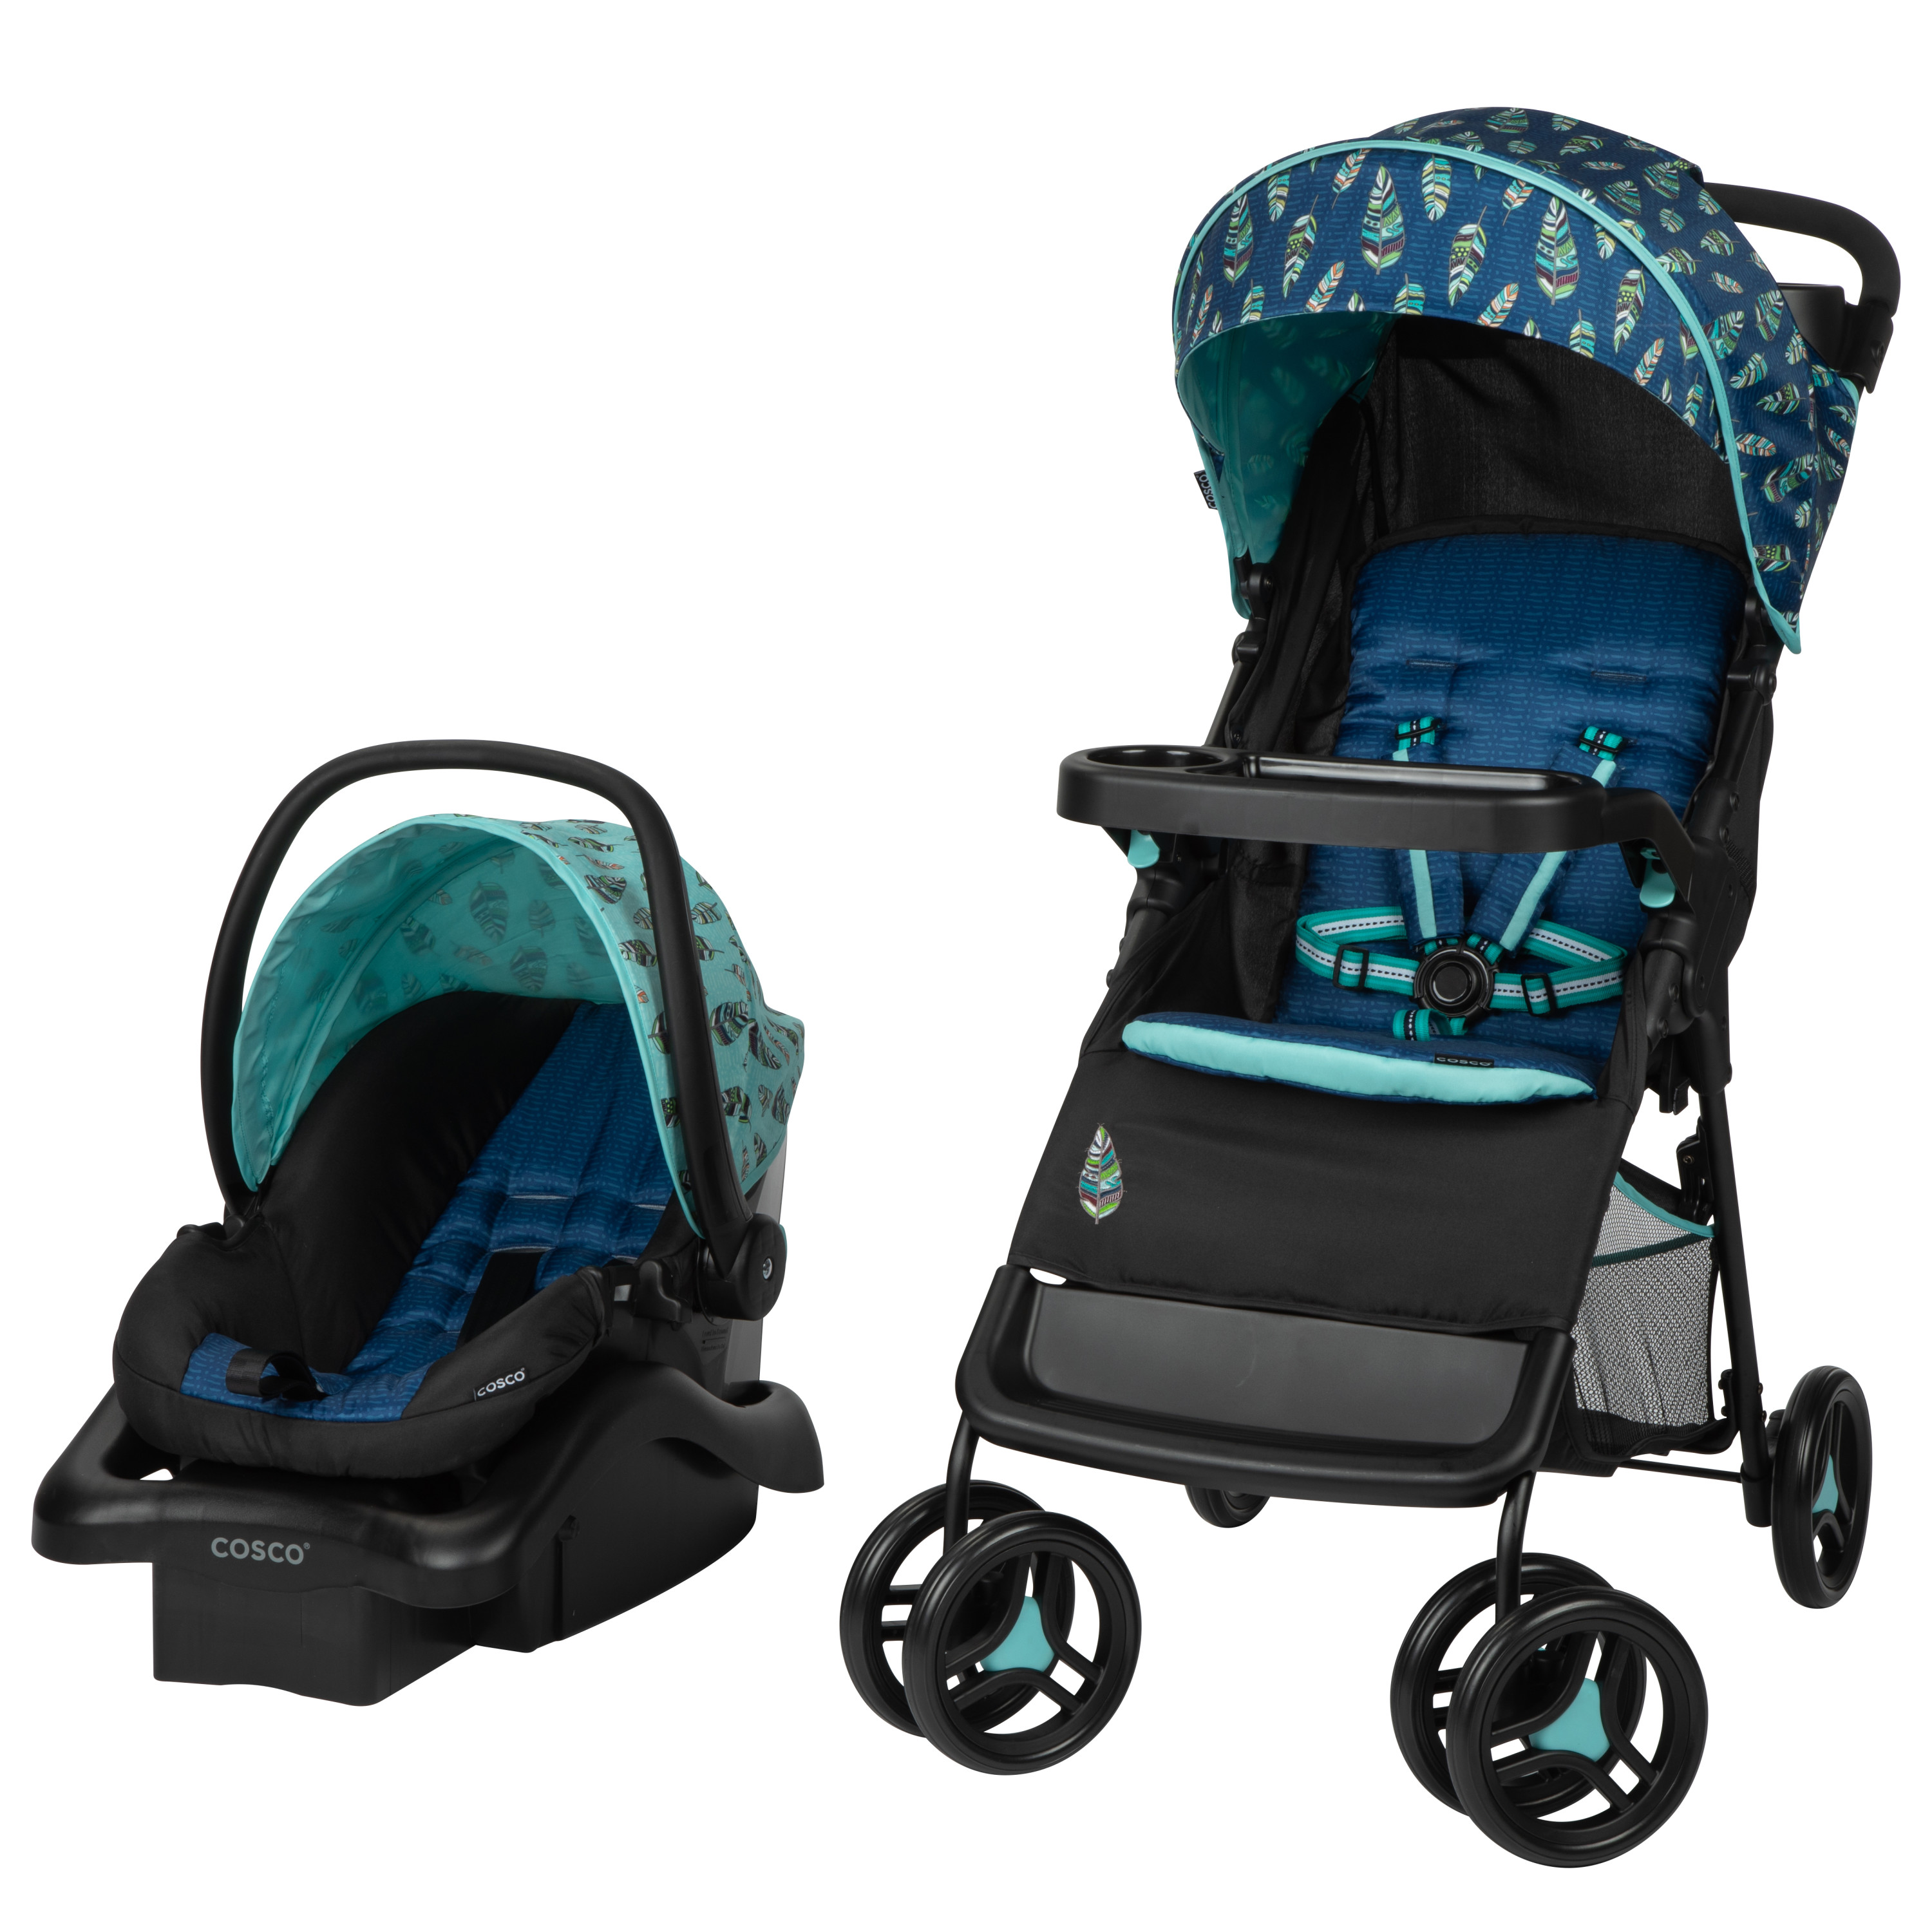 Cosco Lift & Stroll DX Travel System, Featherly - image 1 of 18